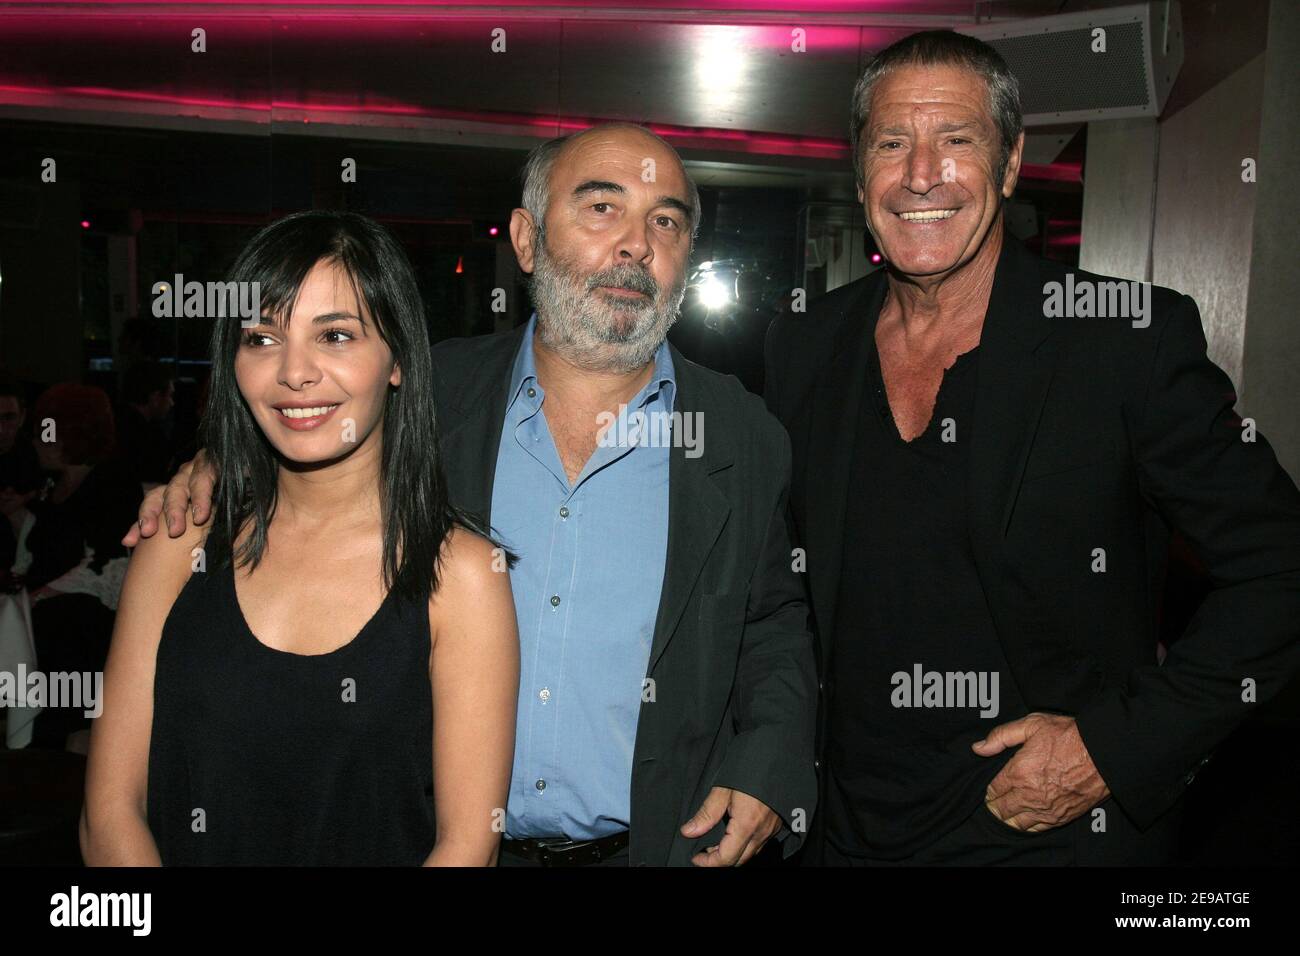 Gerard Jugnot, his girlfriend Saida Jawad and Jean-Claude Darmon attend a party to celebrate the Raphael Mezrahi's birthday at L'Etoile in Paris, France on June 12, 2006. Photo by Benoit Pinguet/ABACAPRESS.COM. Stock Photo